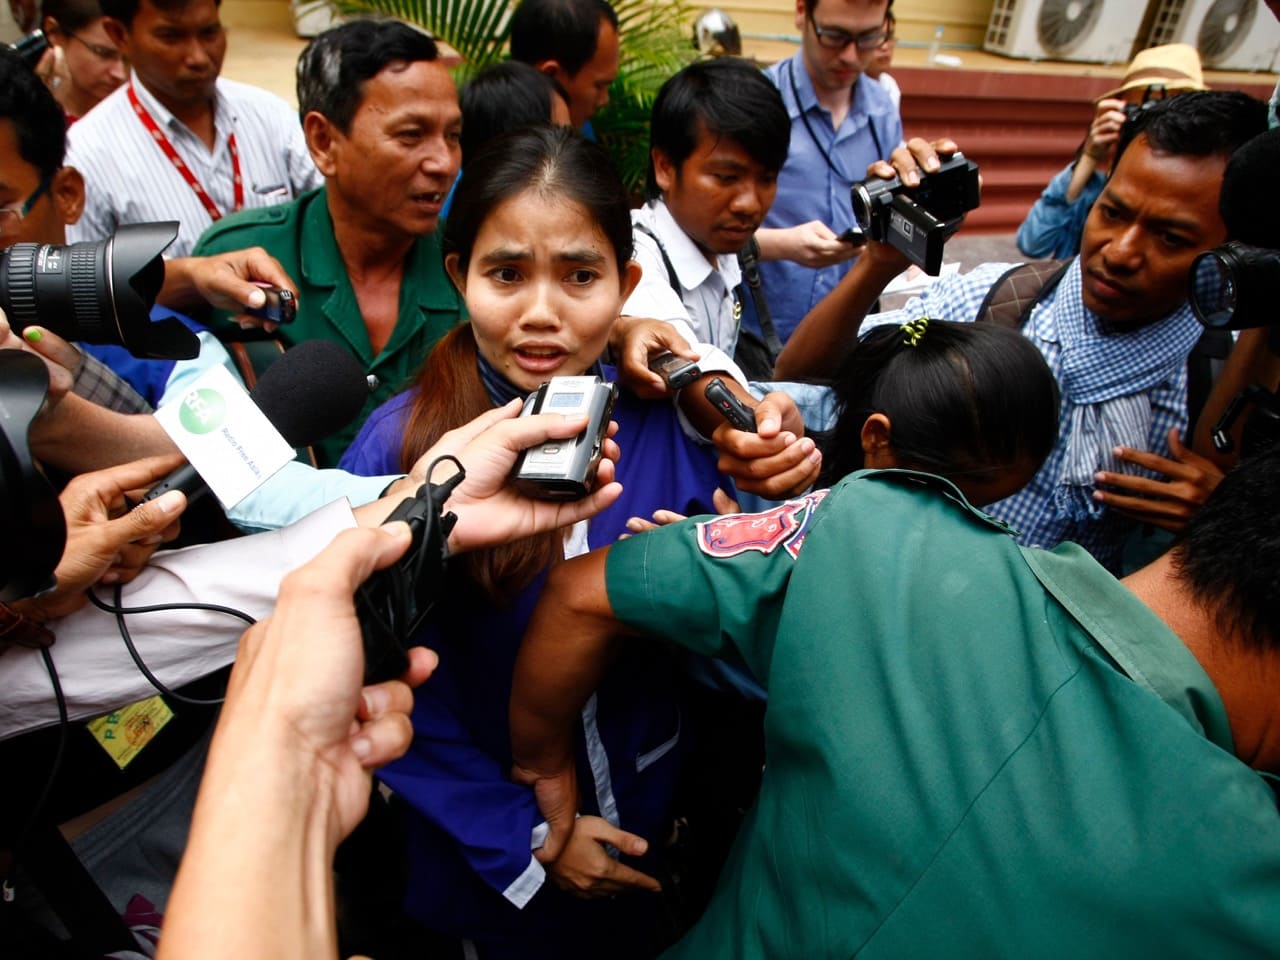 Yorm Bopha, center, is surrounded by a pack of journalists as she is escorted by prison guards at the end of her hearing at the Supreme Court, in Phnom Penh, 22 November 2013, AP Photo/Heng Sinith